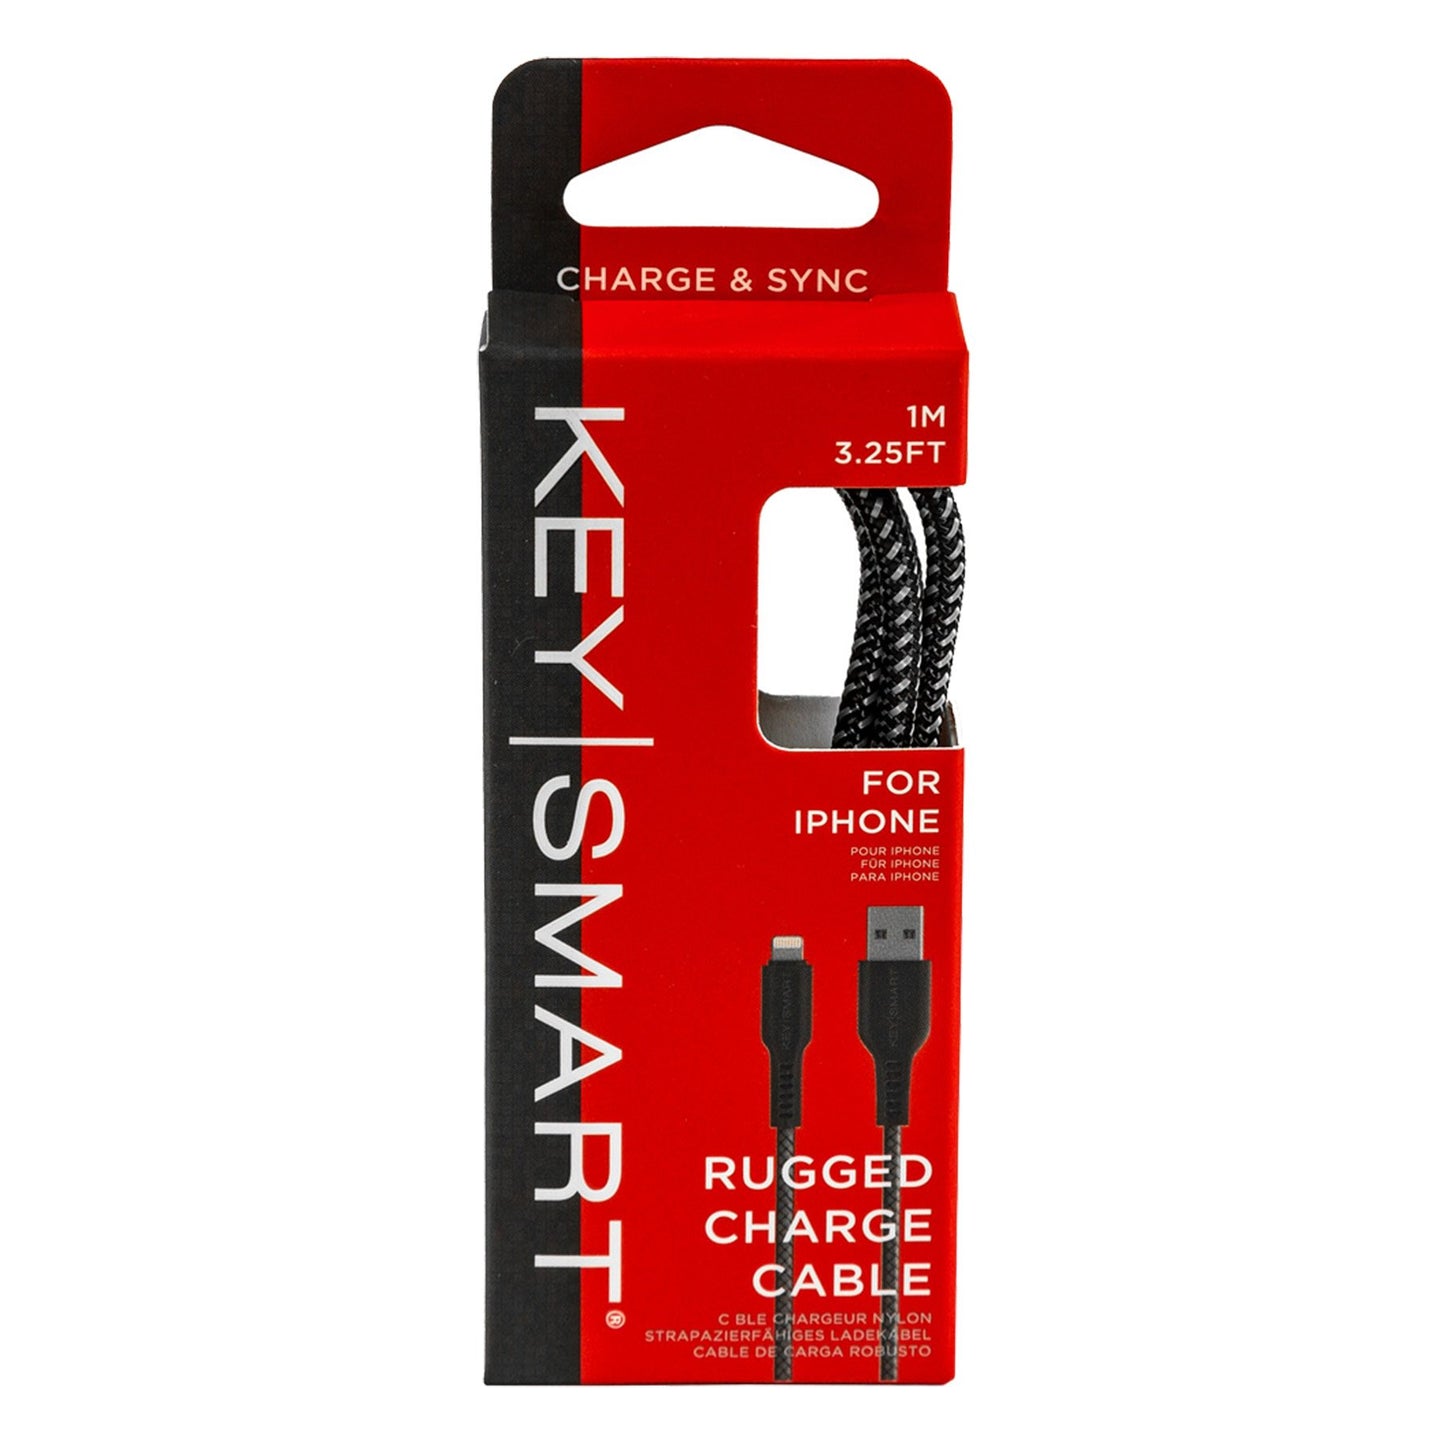 KeySmart Rugged Charge Cable